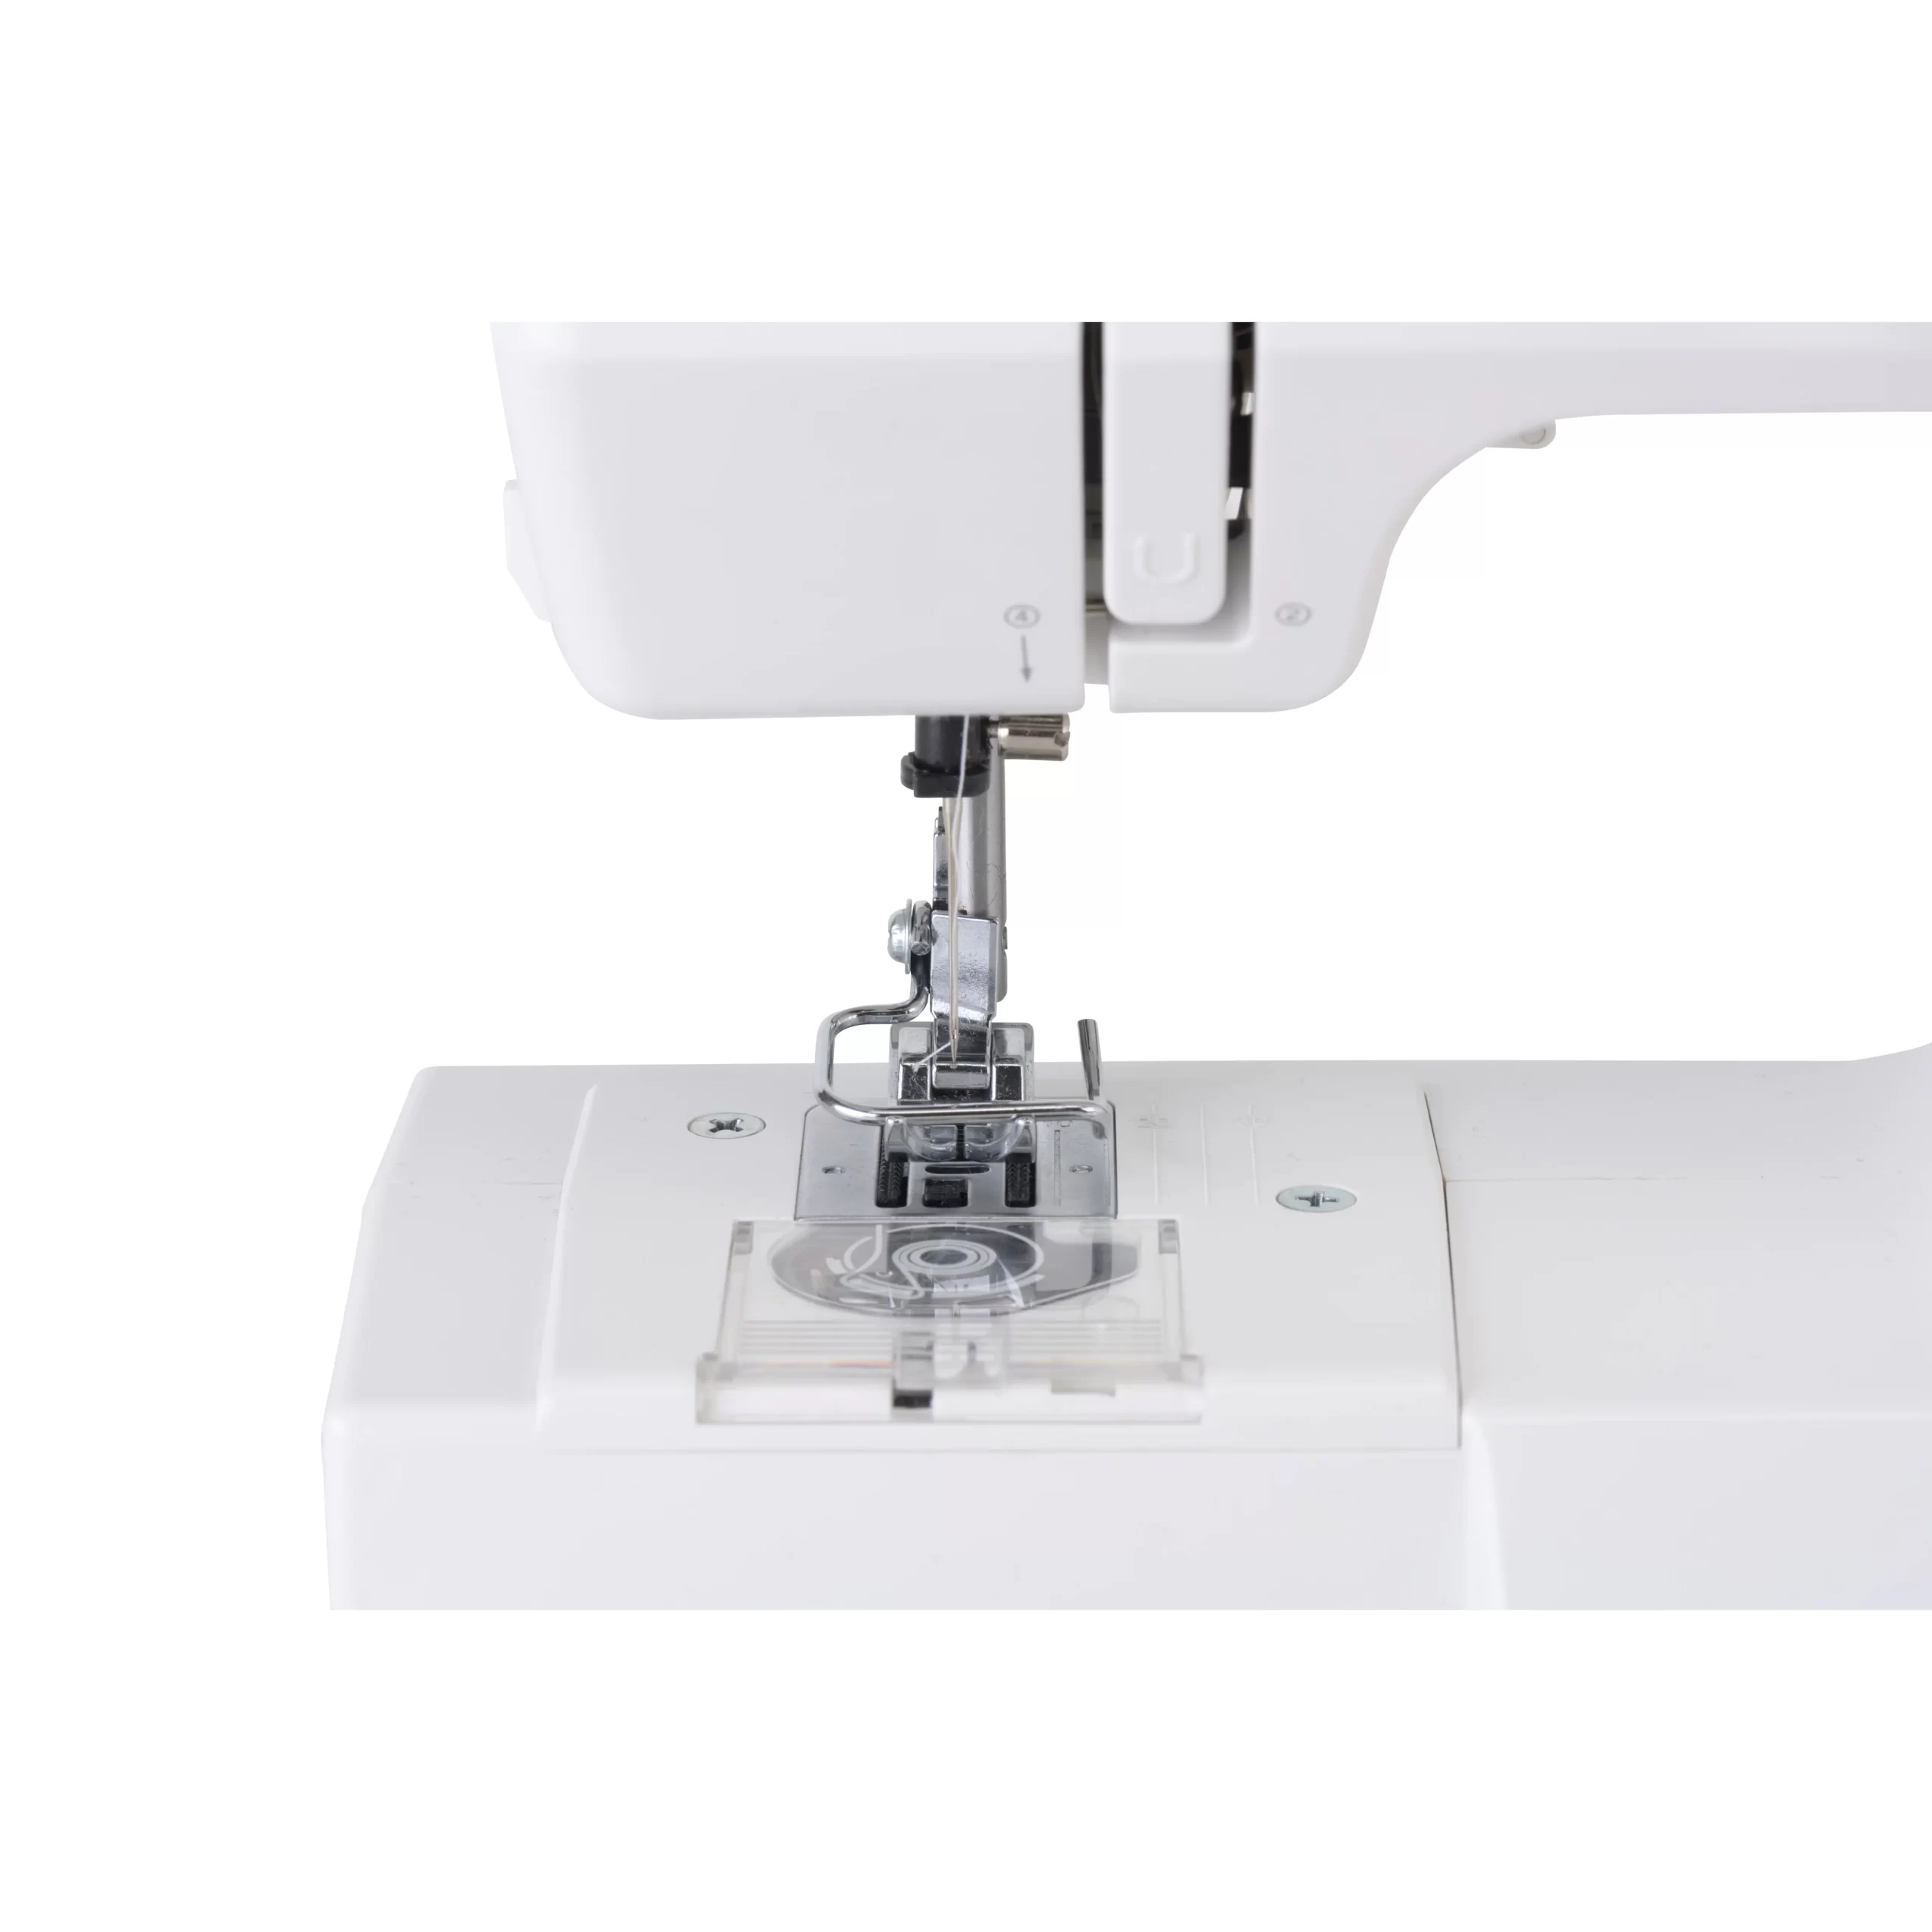 Owners Get Started Videos for Singer M1000 Sewing Machine